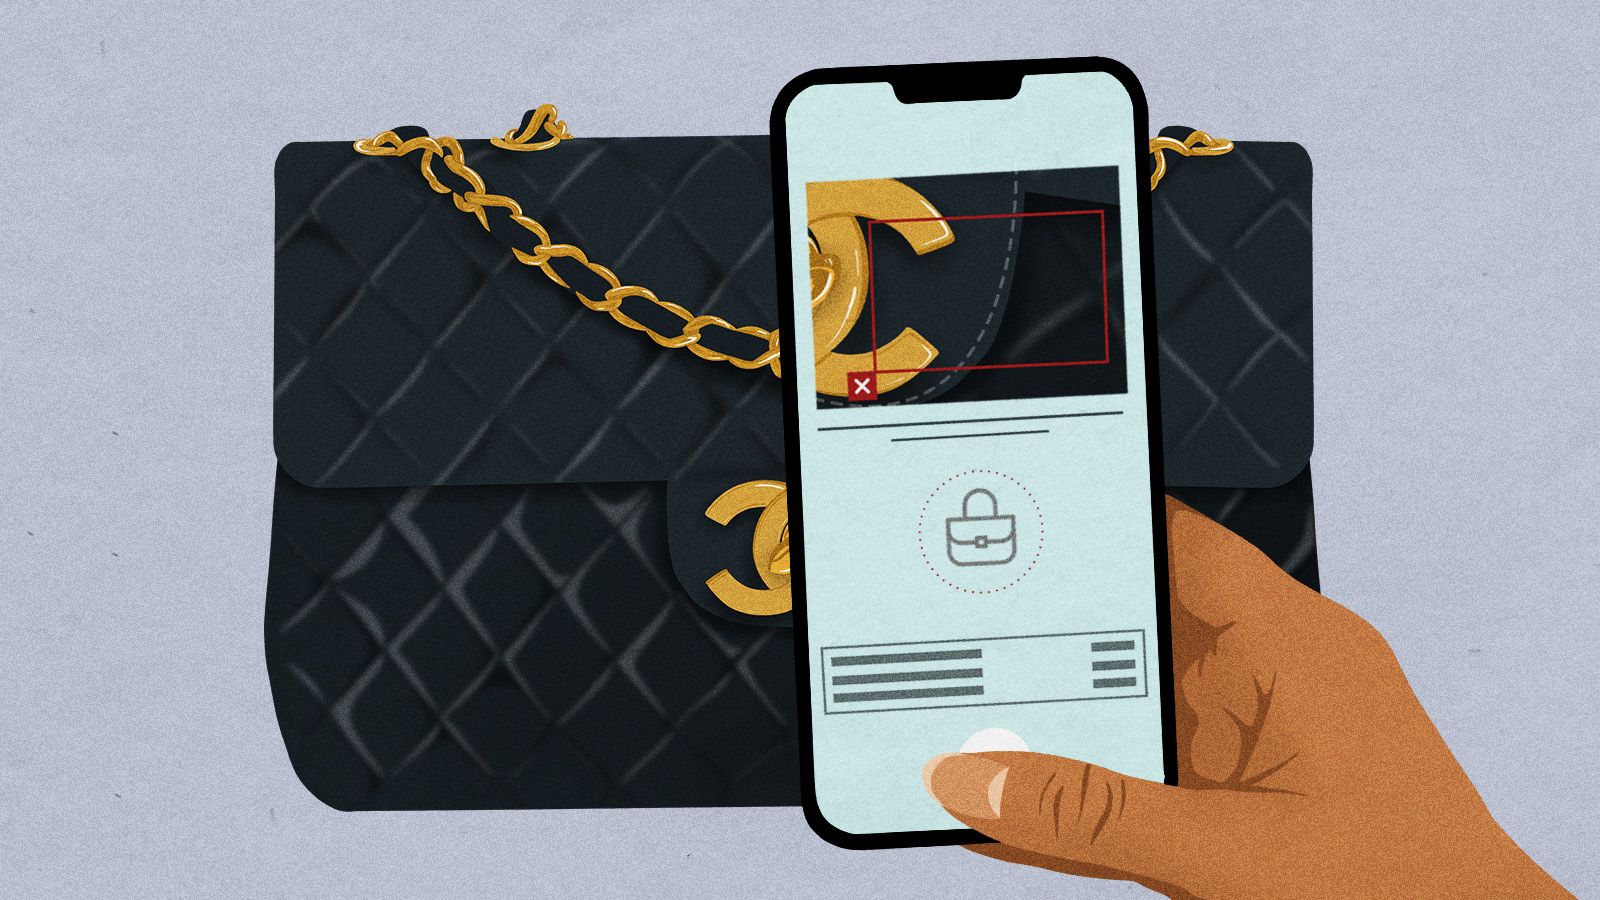 A new wave of scannable digital IDs, powered by AI and blockchain, hope to provide extra security by allowing consumers to verify their luxury goods instantaneously.